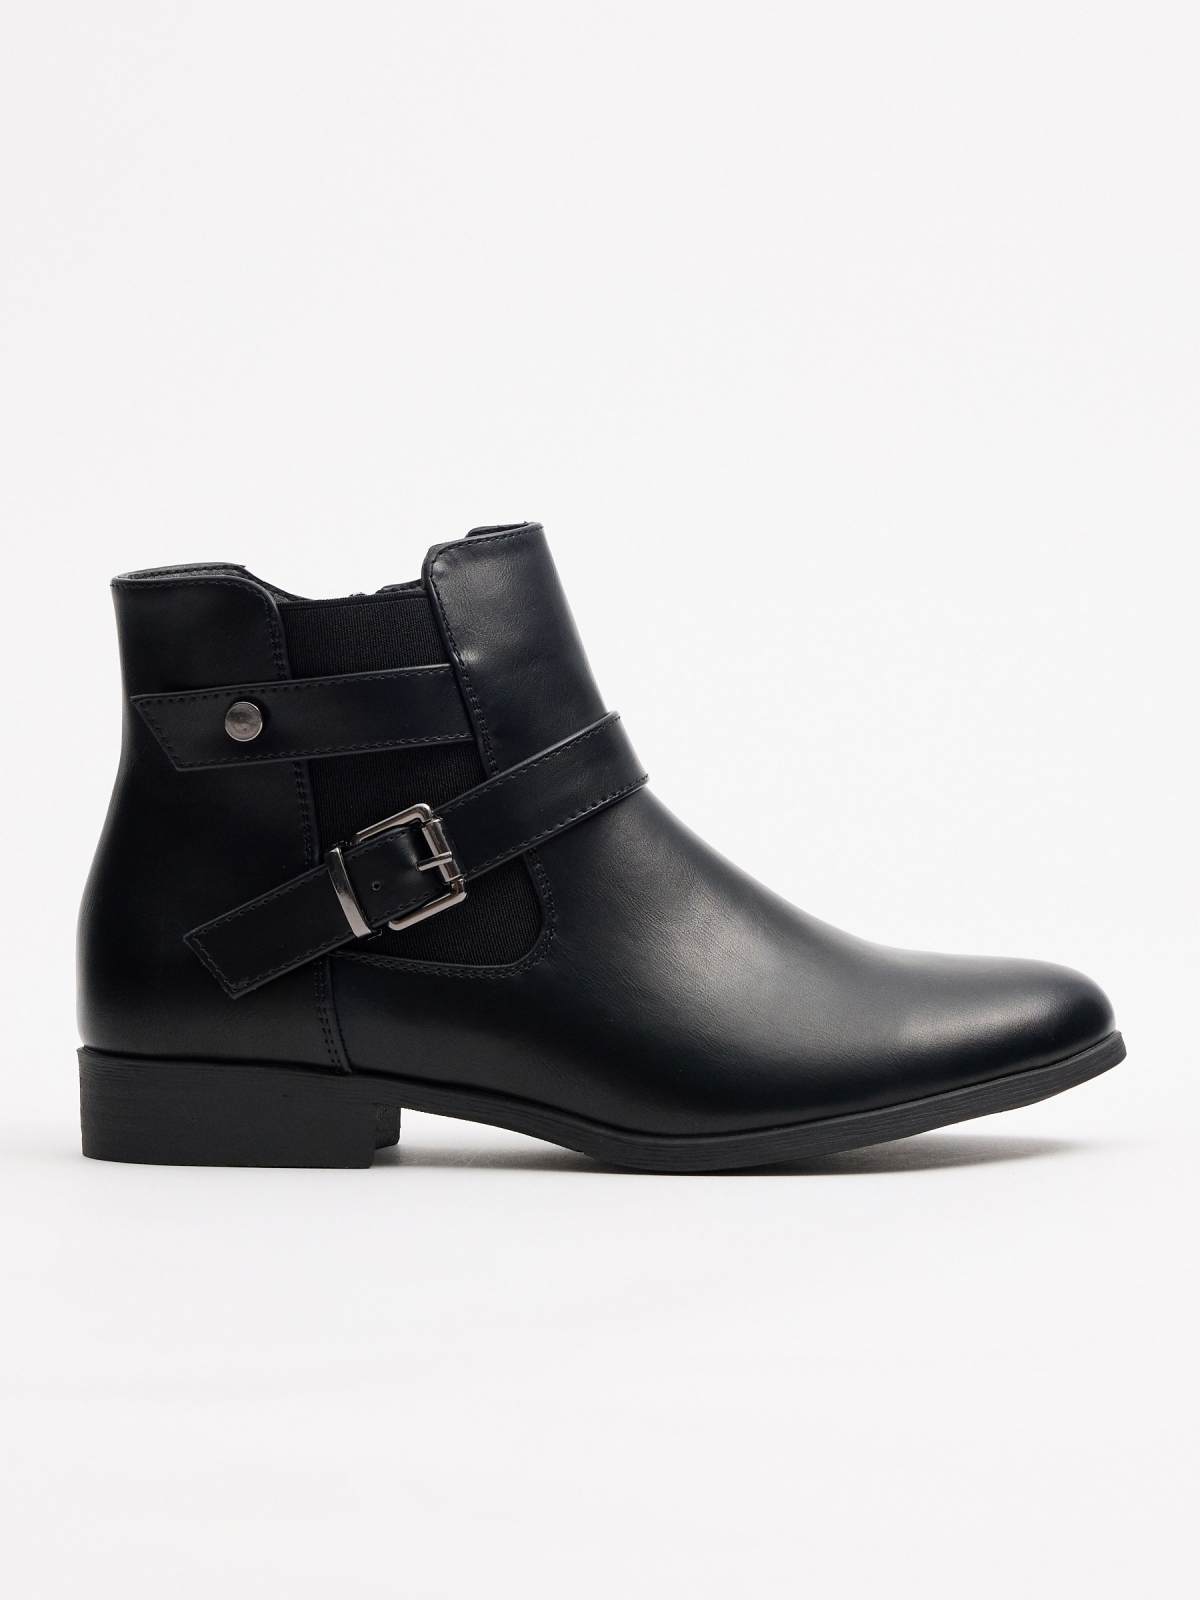 Classic elastic ankle boot with crossed buckles